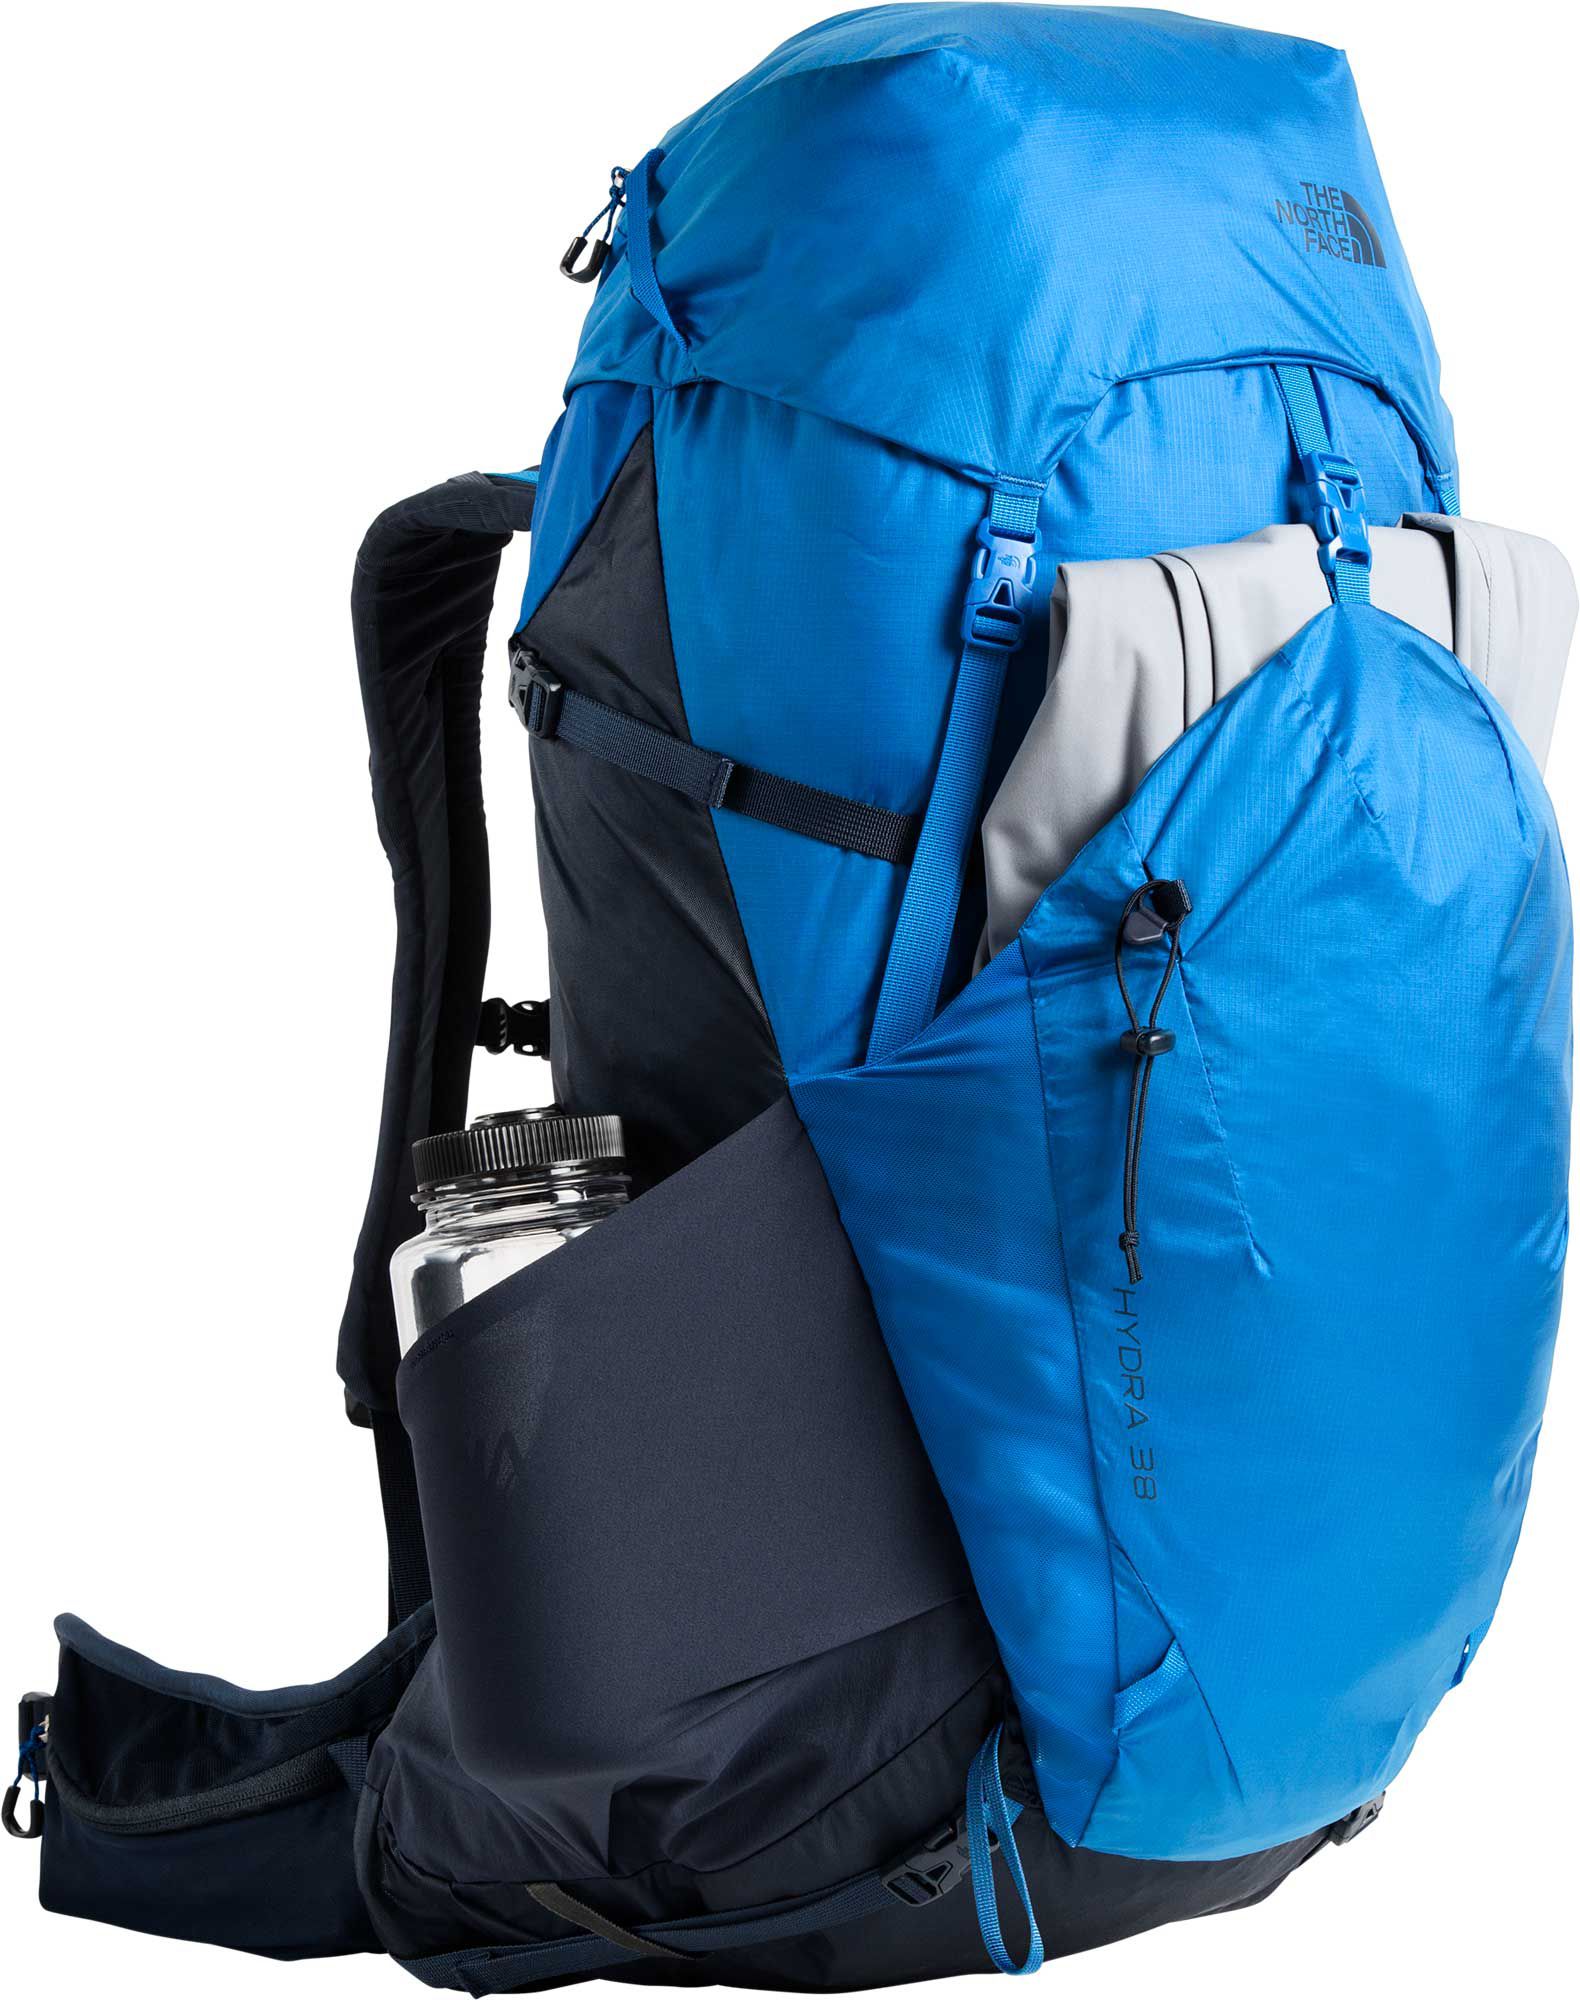 hydra 38 backpack review